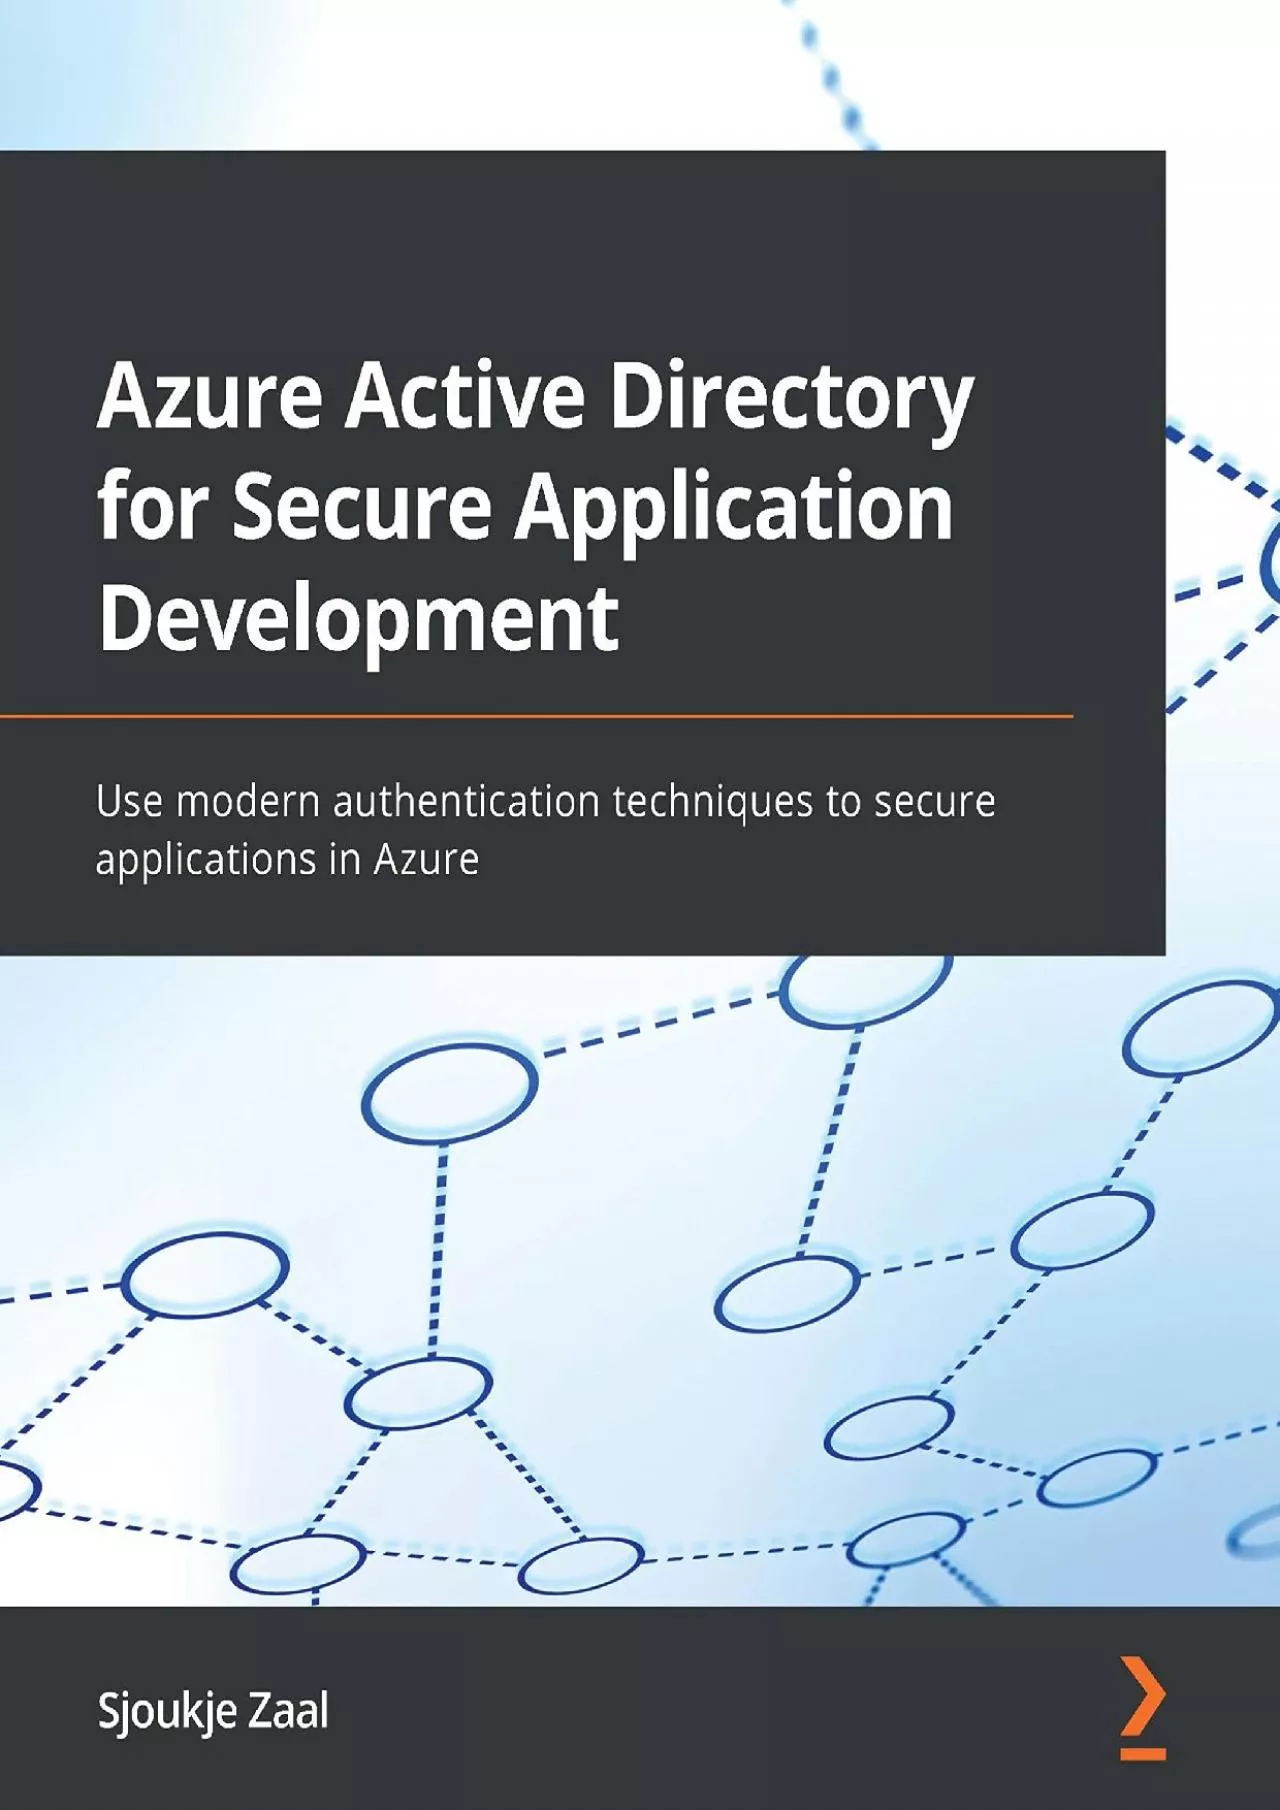 Azure Active Directory for Secure Application Development Use modern authentication techniques